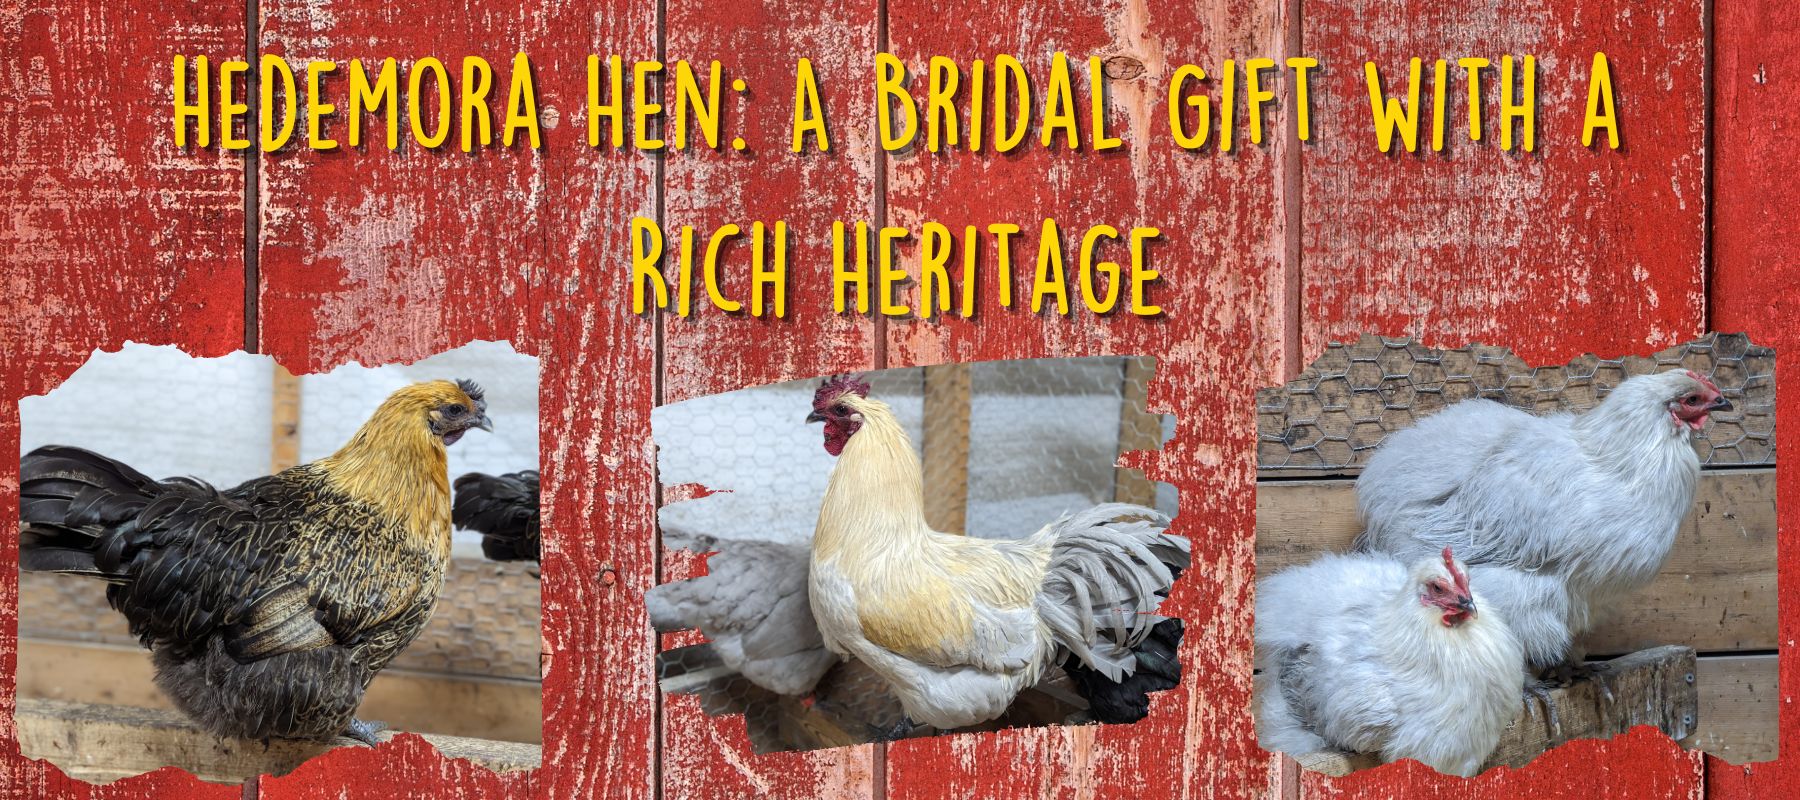 Hedemora Hen: A Bridal Gift with a Rich Heritage